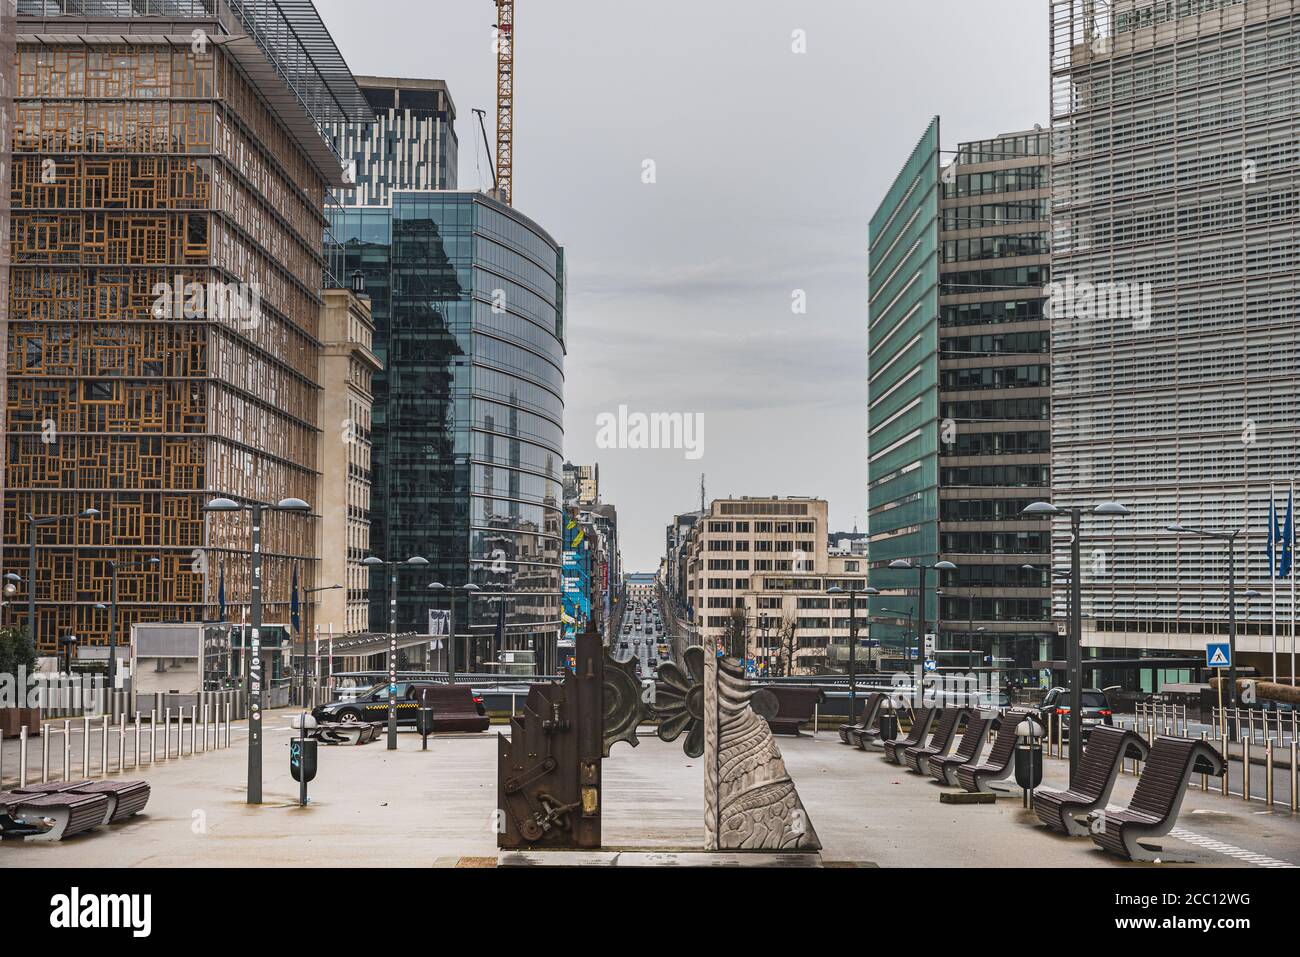 Growing businesses and modern buildings by Le Berlaymont (European Commission) with a flower like gear statue represent a synthetic, fake society Stock Photo